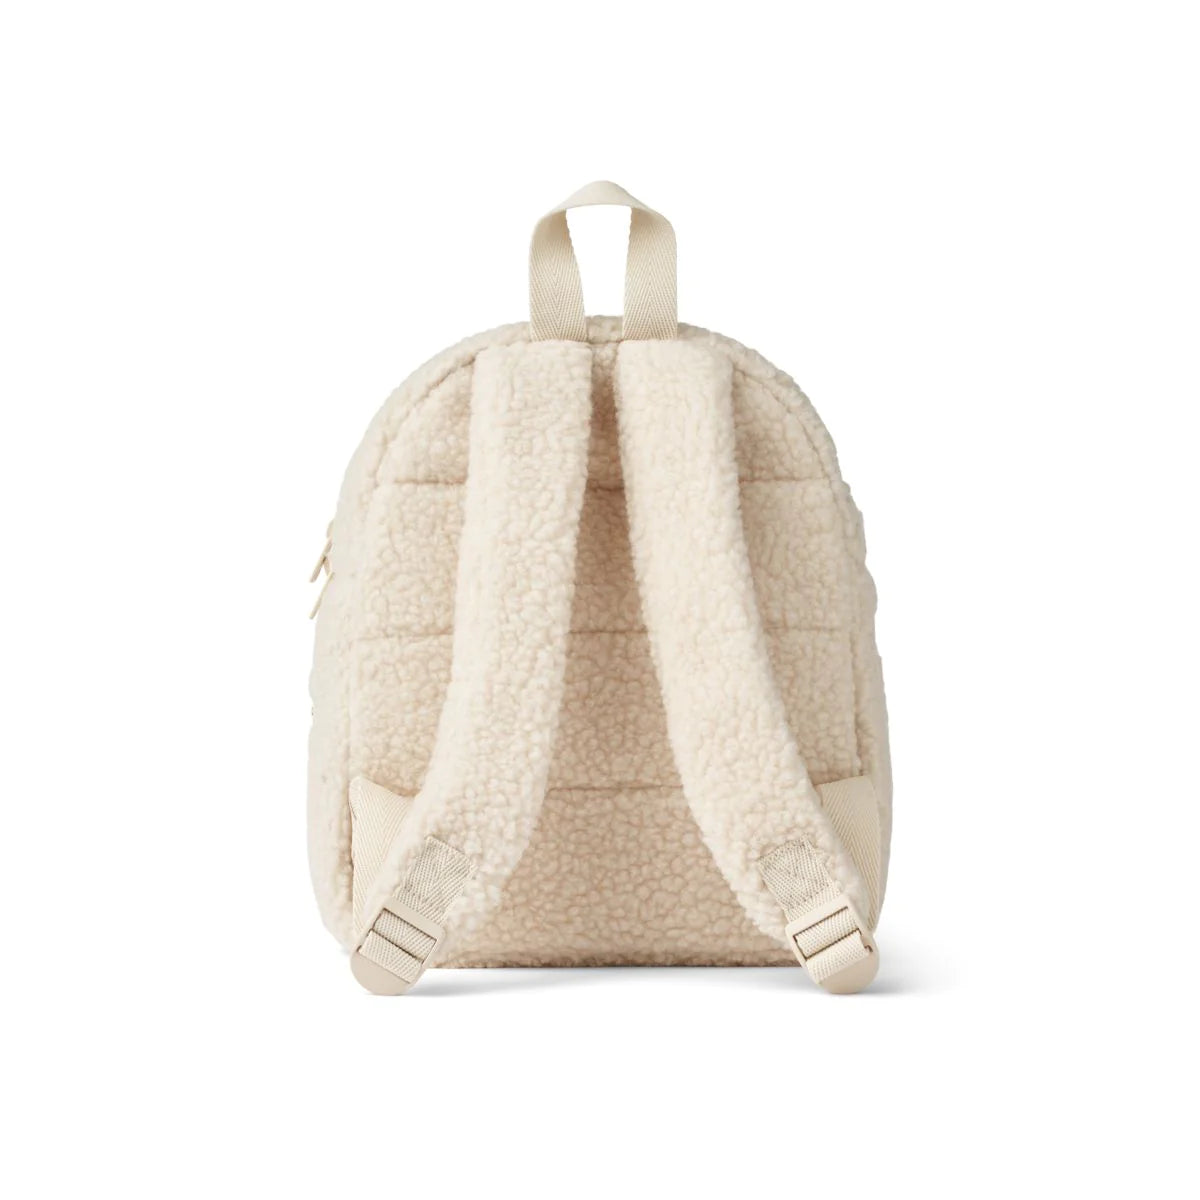 Liewood - Allan Pile Embroidery Backpack with ears - PEACH / SANDY EMBROIDERY